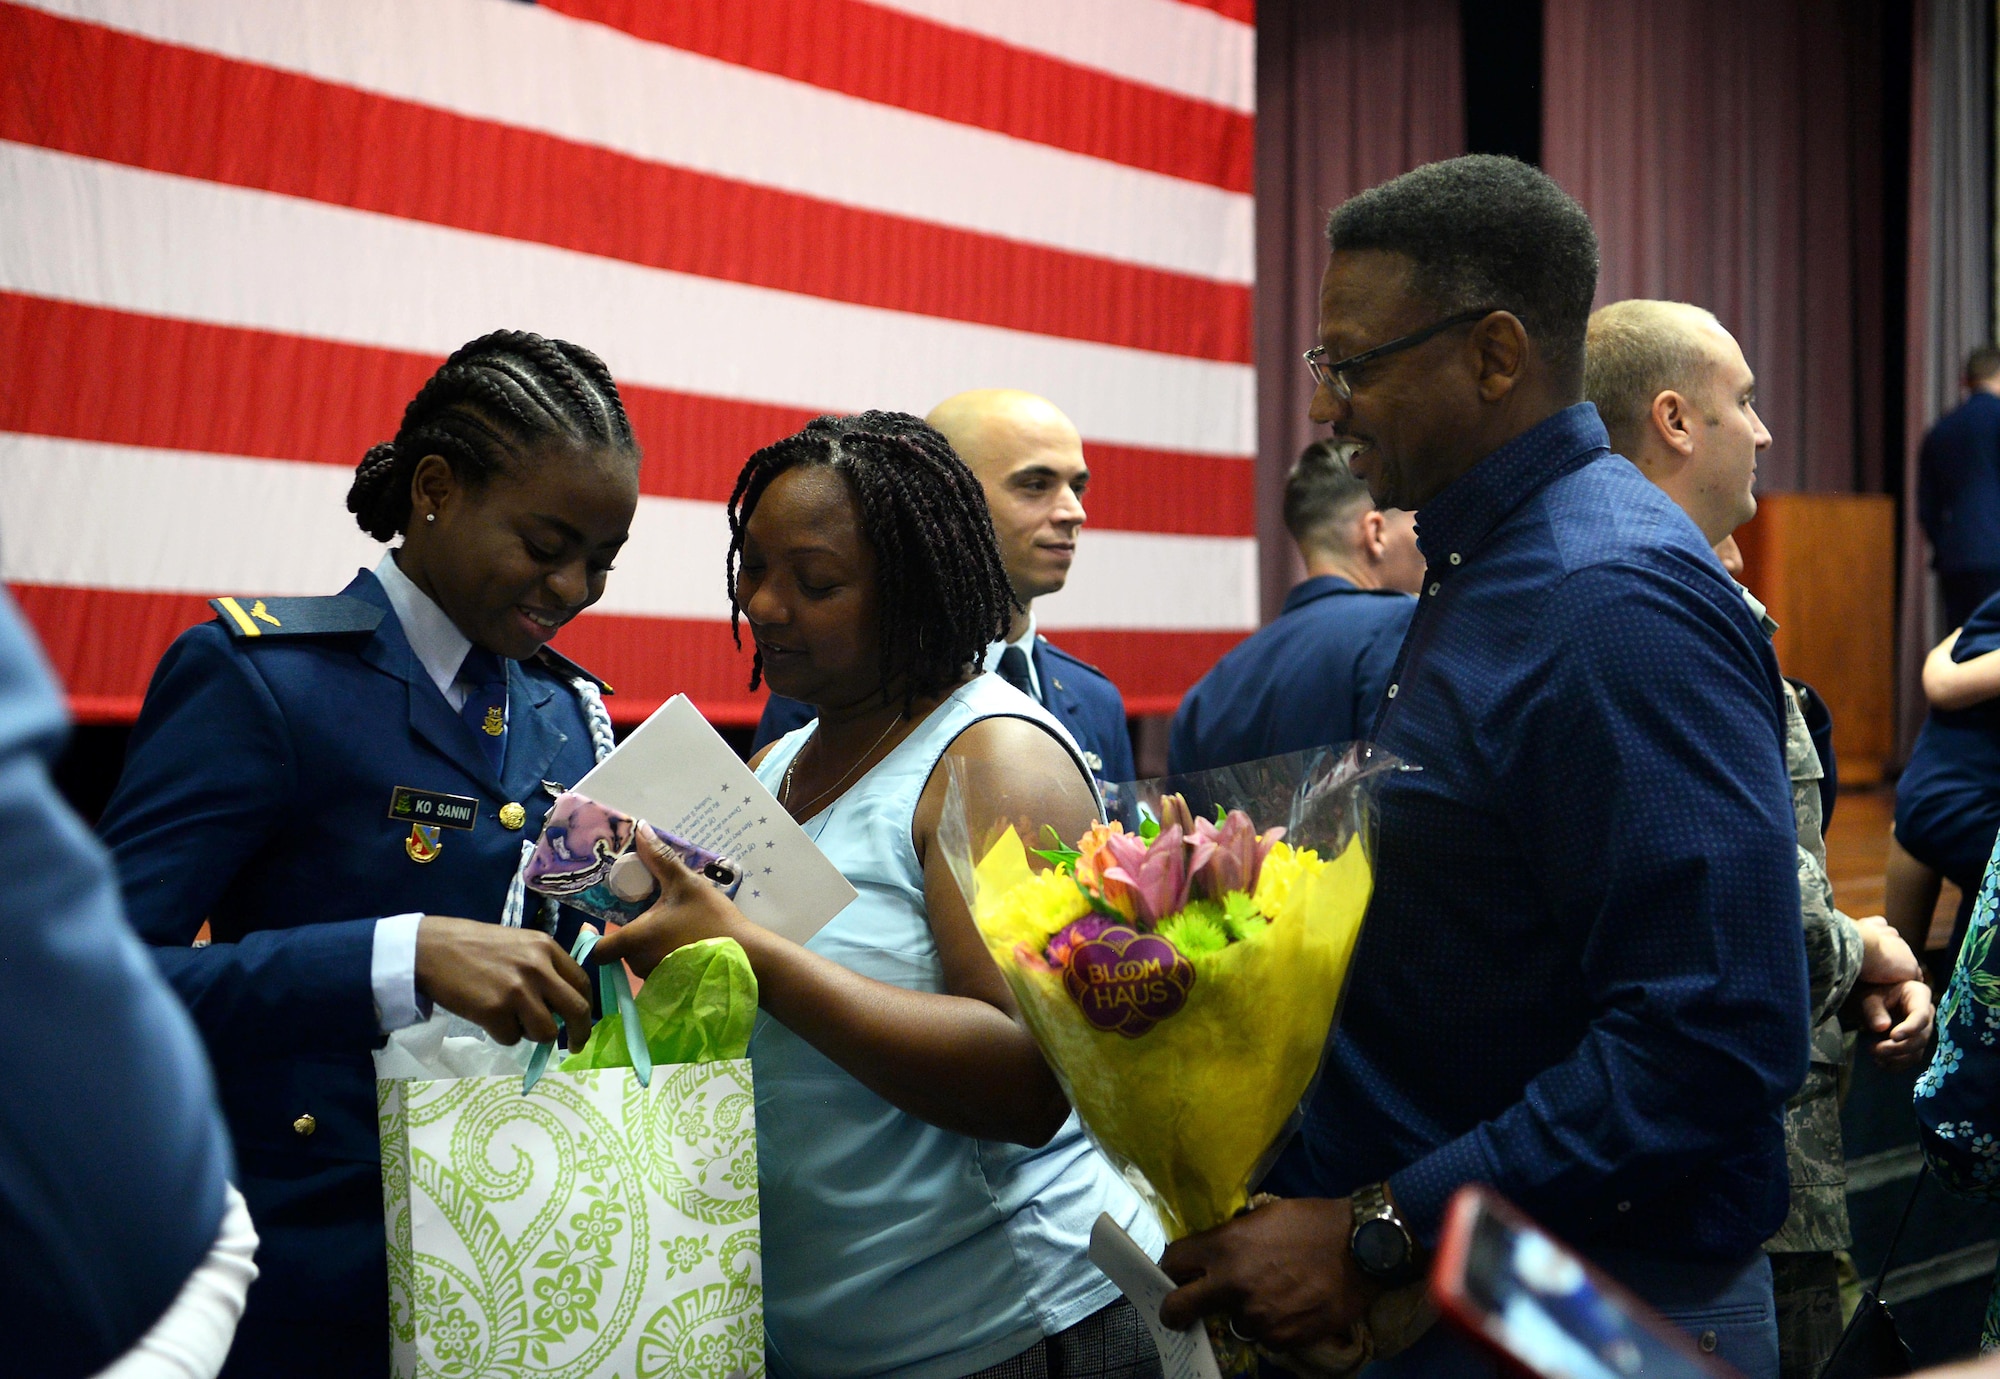 First Lt. Kafayat Sanni is congratulated by friends during a graduation ceremony Aug. 16, 2019, on Columbus Air Force Base, Miss. Sanni became the first female fighter pilot in the Nigerian air force upon graduating from the Aviation Leadership Program. (U.S. Air Force photo by Airman 1st Class Hannah Bean)